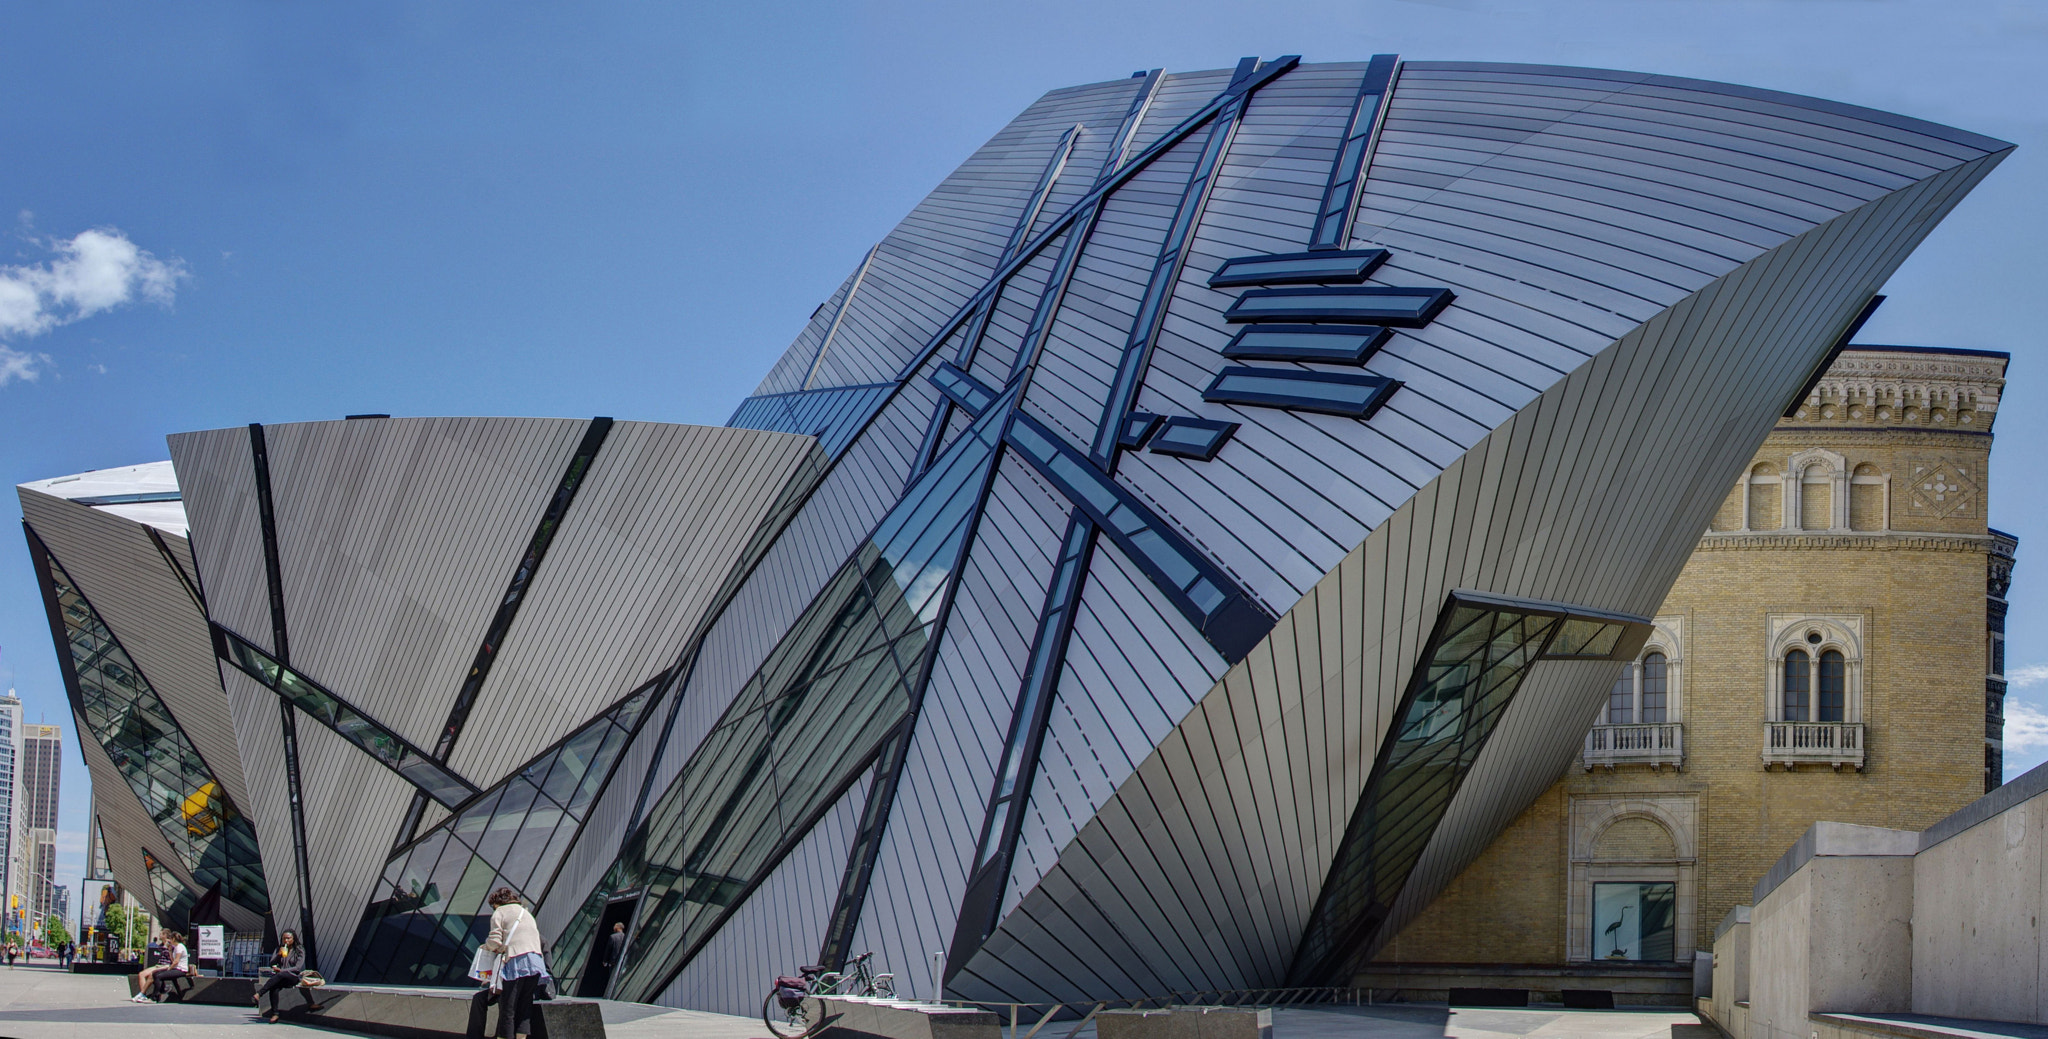 Daniel Libeskind's The Crystal, the Royal Ontario Museum by Zhou YU / 500px